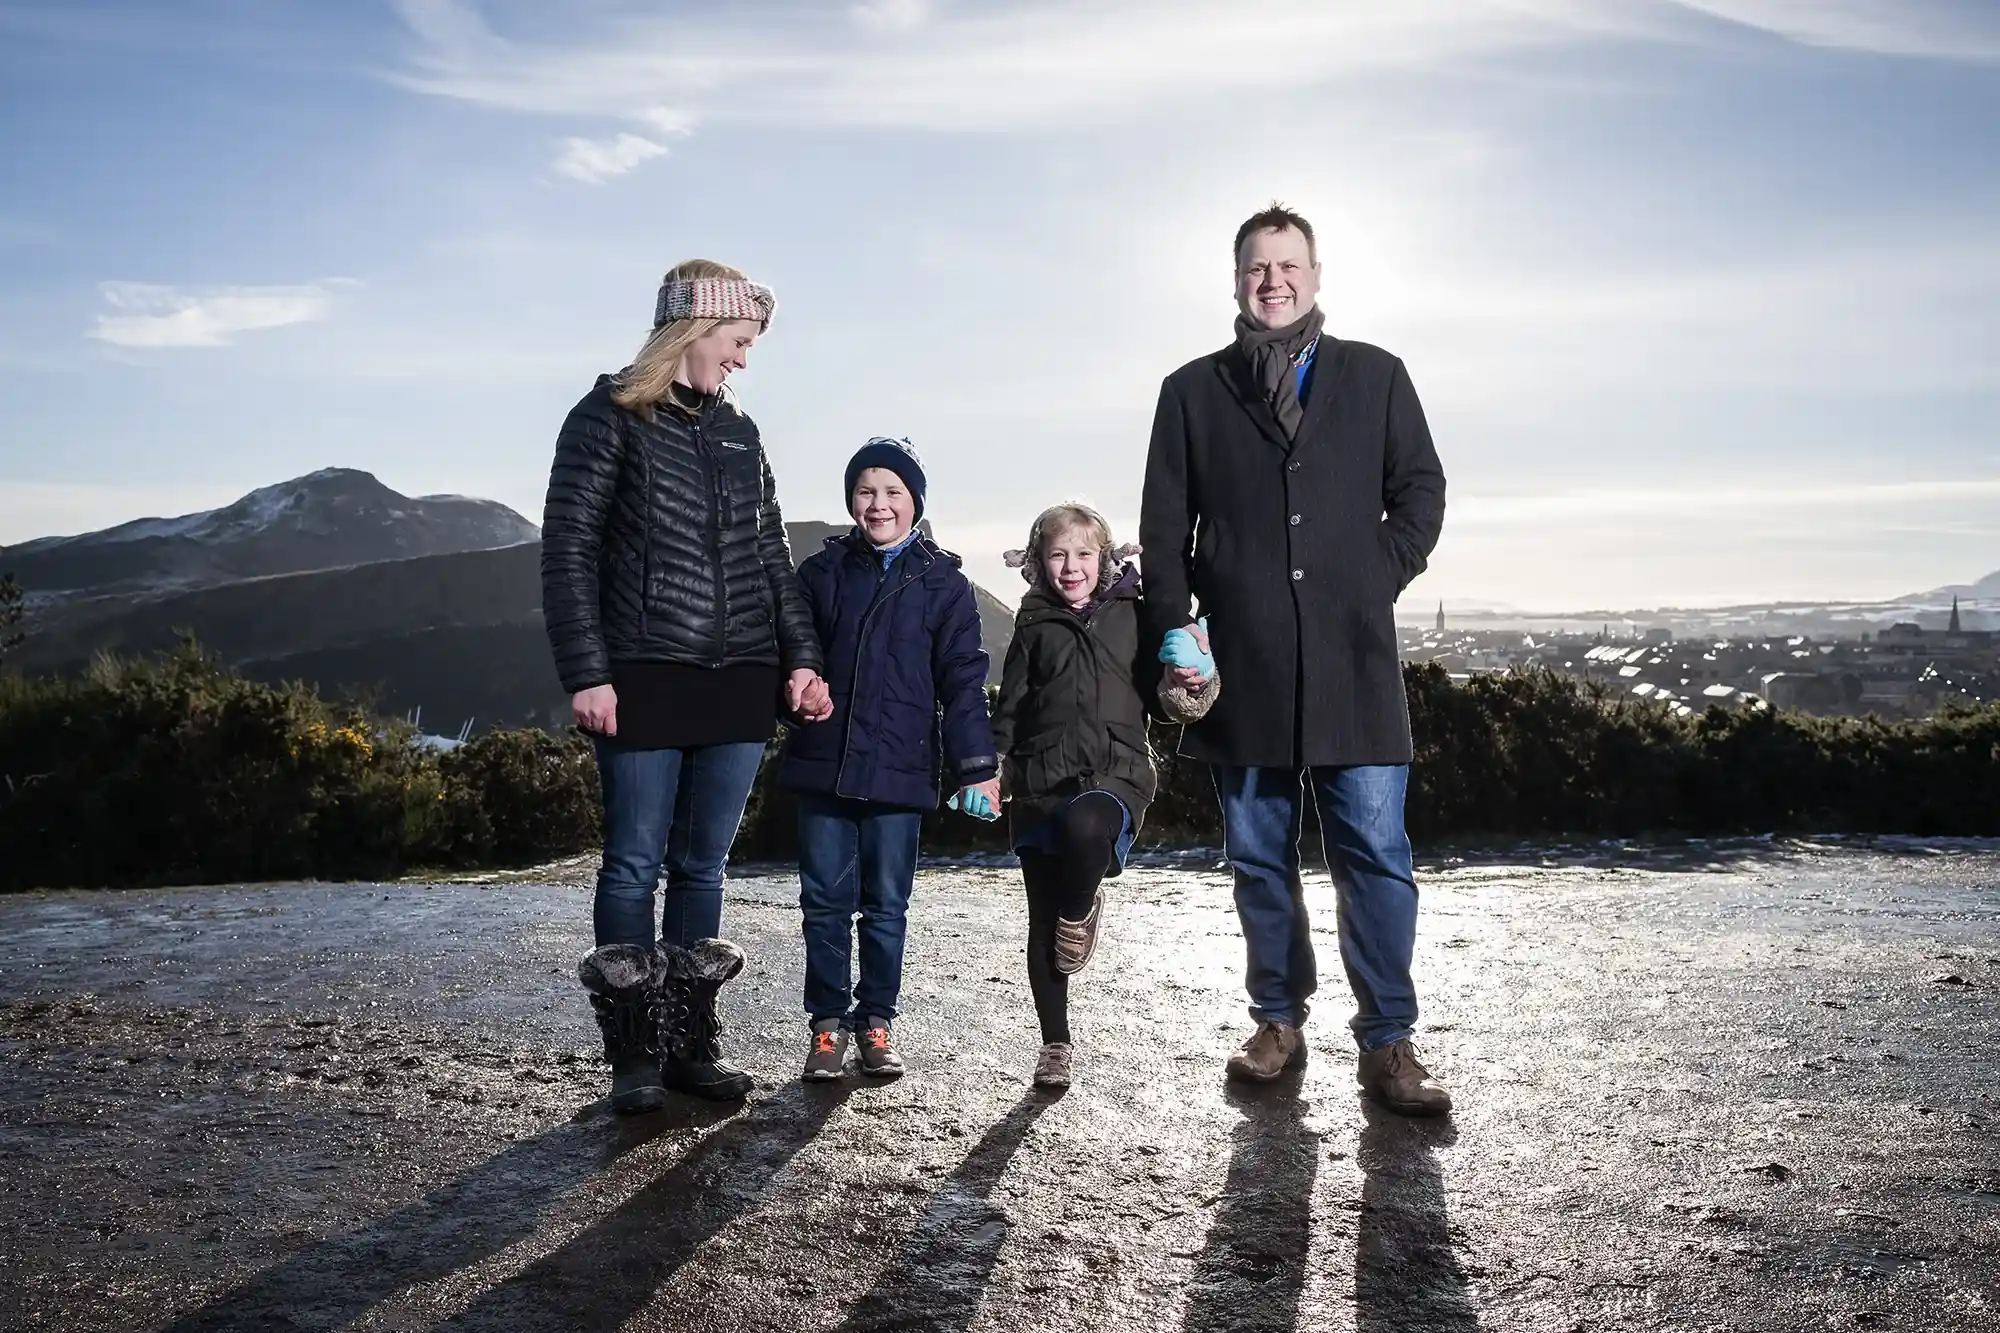 A family of four, two adults and two children, stand outdoors on a paved path with a scenic mountainous backdrop. The adults wear coats, and the children wear jackets and hats. One child lifts a leg playfully.